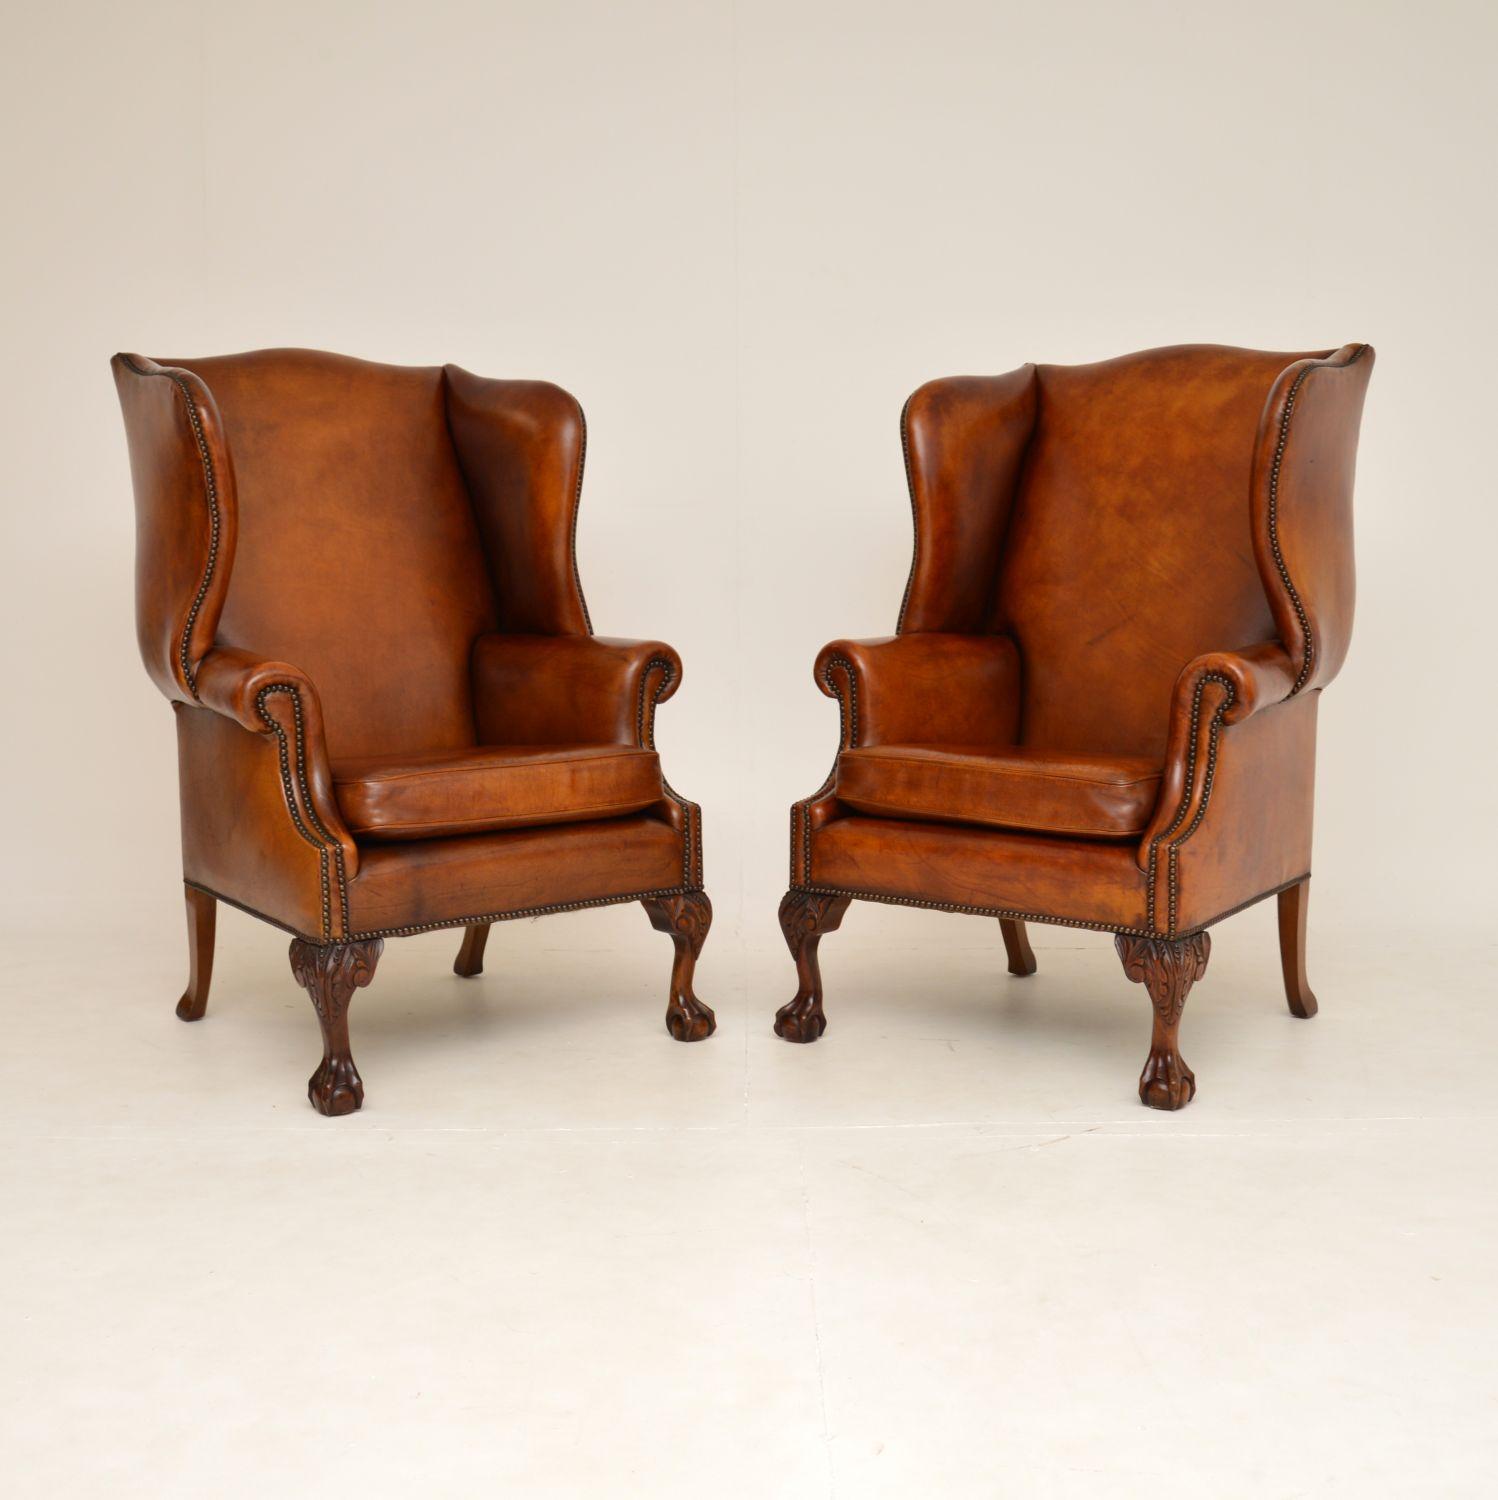 A fantastic pair of antique wing back leather armchairs in the Georgian style. They were hand made in England, and date from around the 1950’s.

They are extremely comfortable with generous proportions, and are of superb quality. The leather has